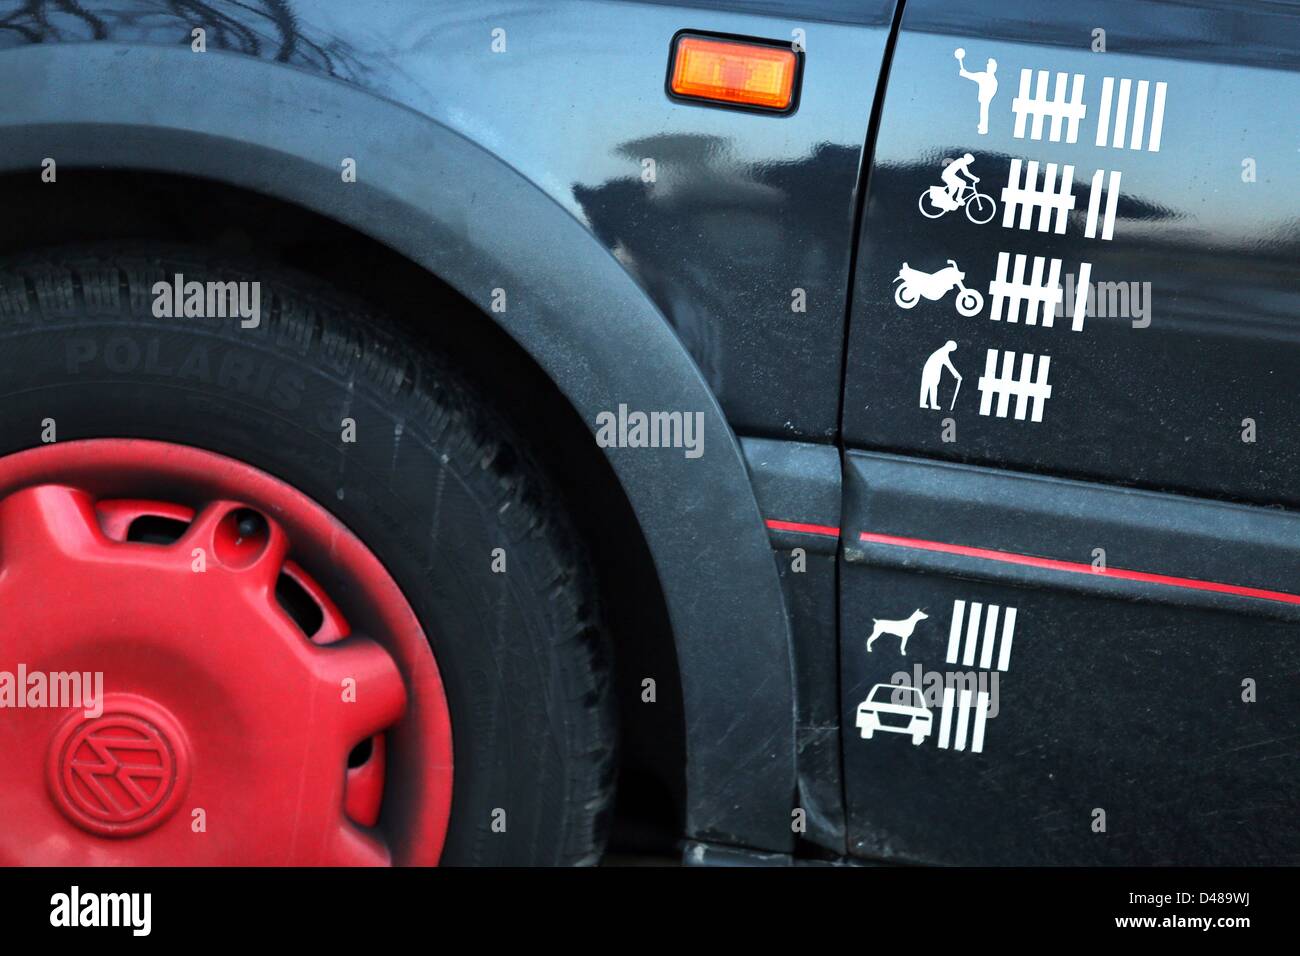 Disreputable accident statistics as a tally sheet stands on a VW Golf 3 in Chemnitz, Germany, 05 March 2013. Tally sheet lists police officers, seniors, dogs and bicycle drivers as victims. The intention of the autor was probably to make a joke. Photo: Jan Woitas Stock Photo